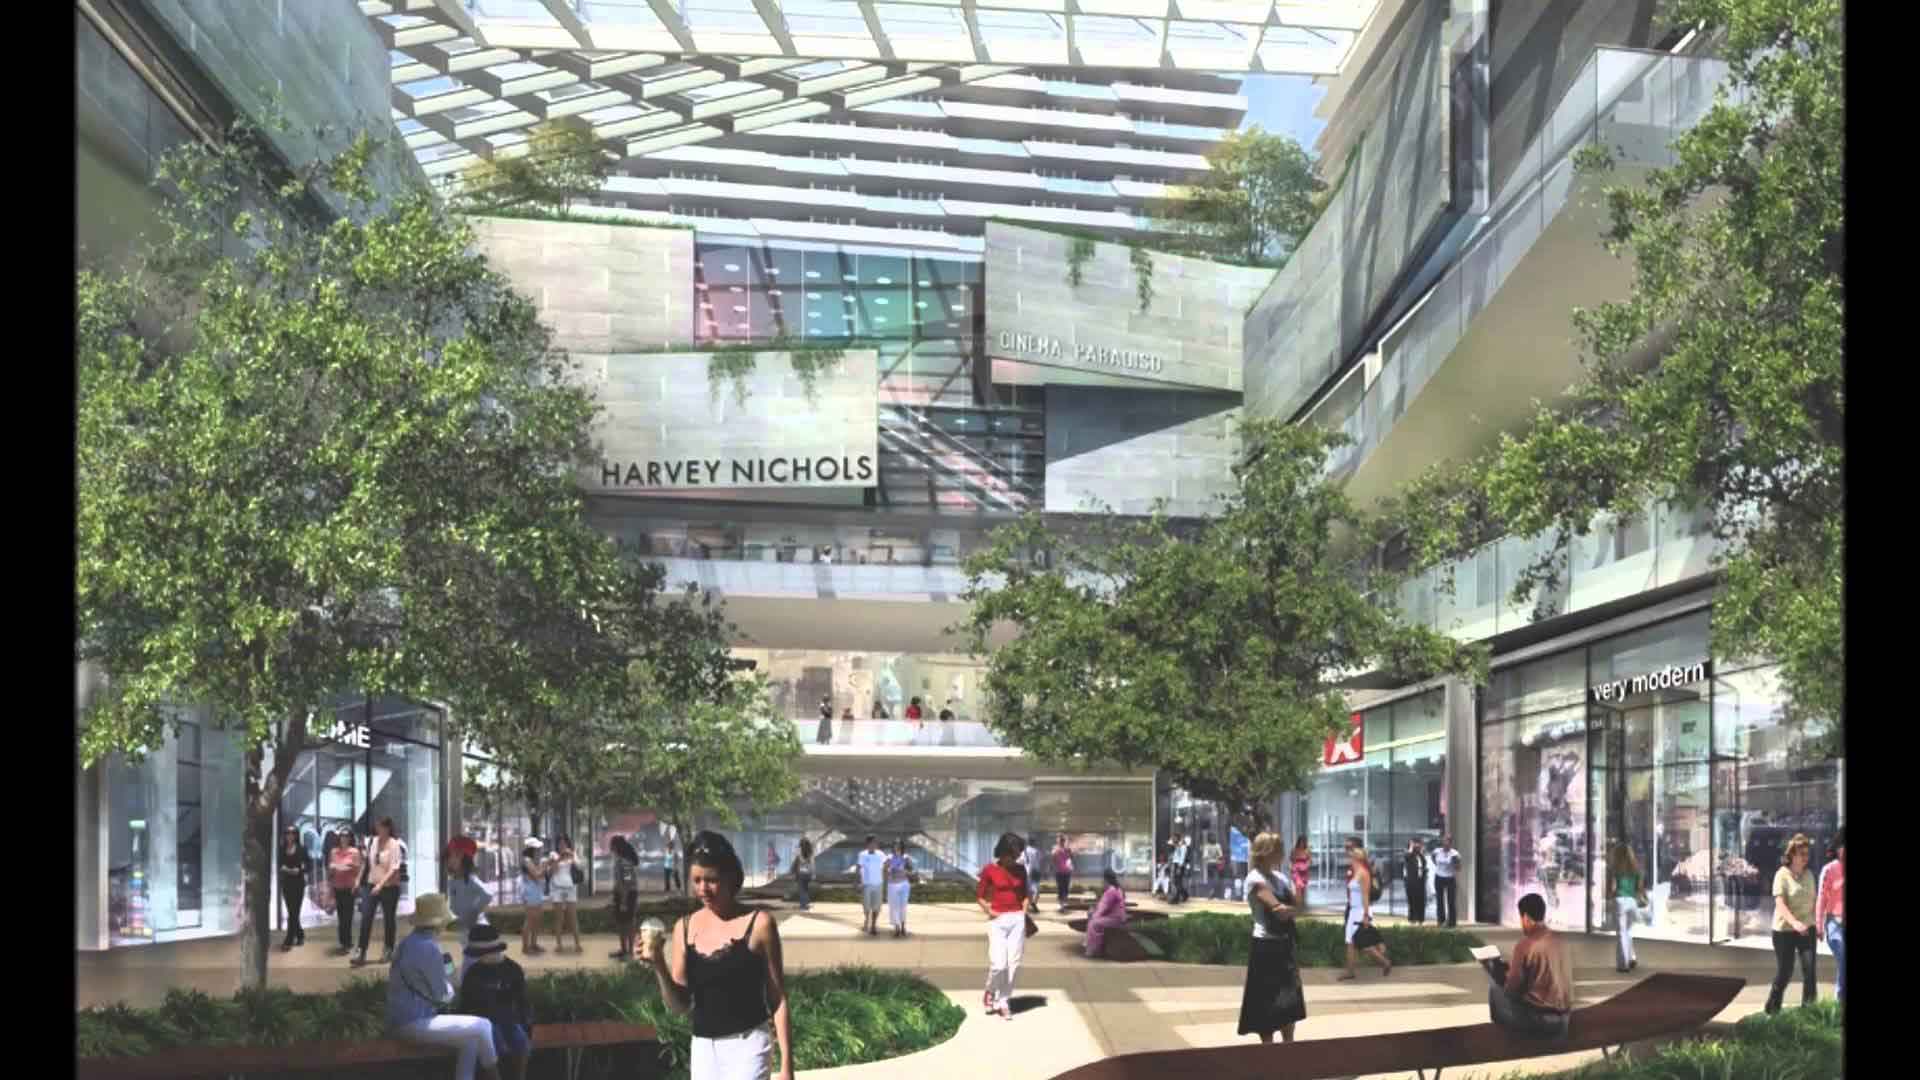 Brickell City Centre opens in two weeks